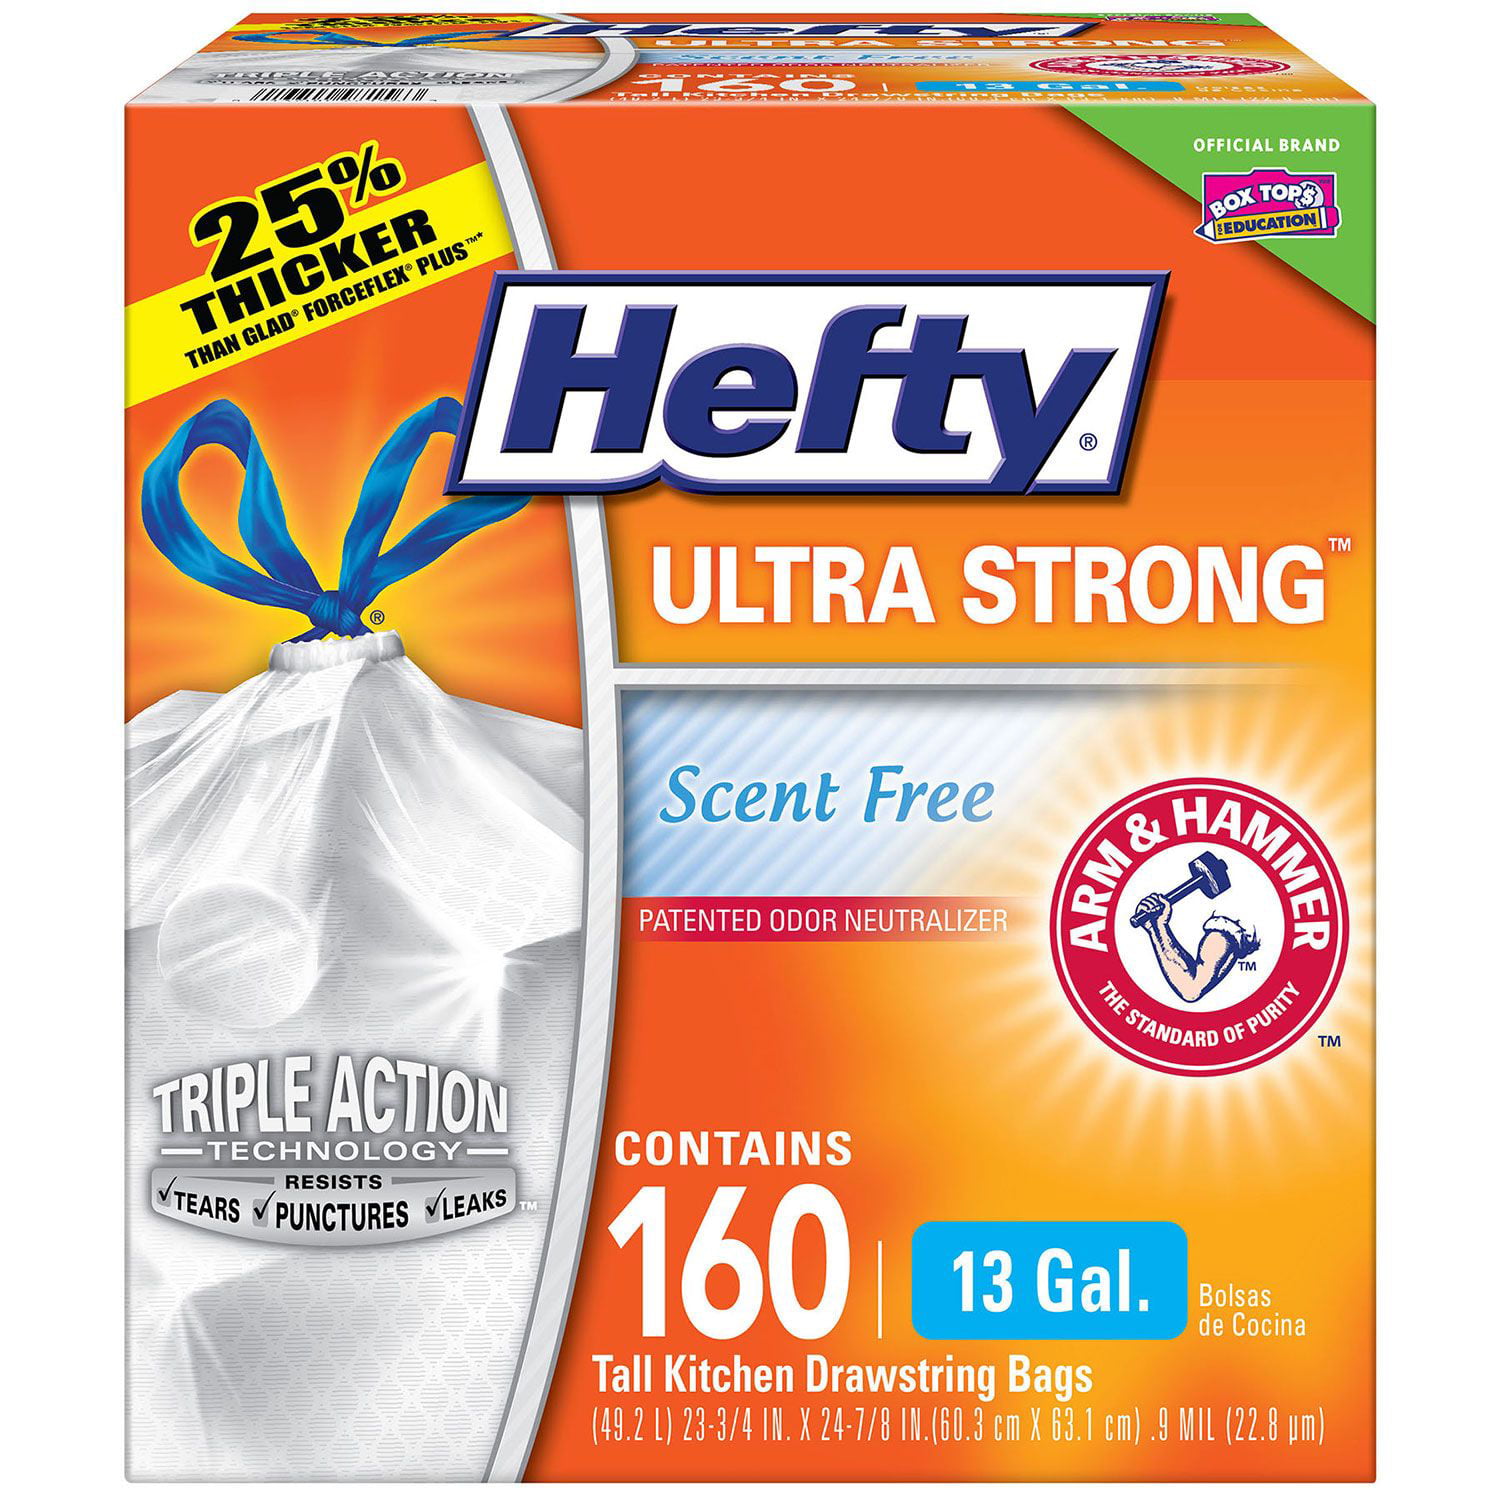 Hefty Citrus Twist Scent Ultra Strong Tall Kitchen Trash Bags 80 Count 13 Gallon Pack of 1